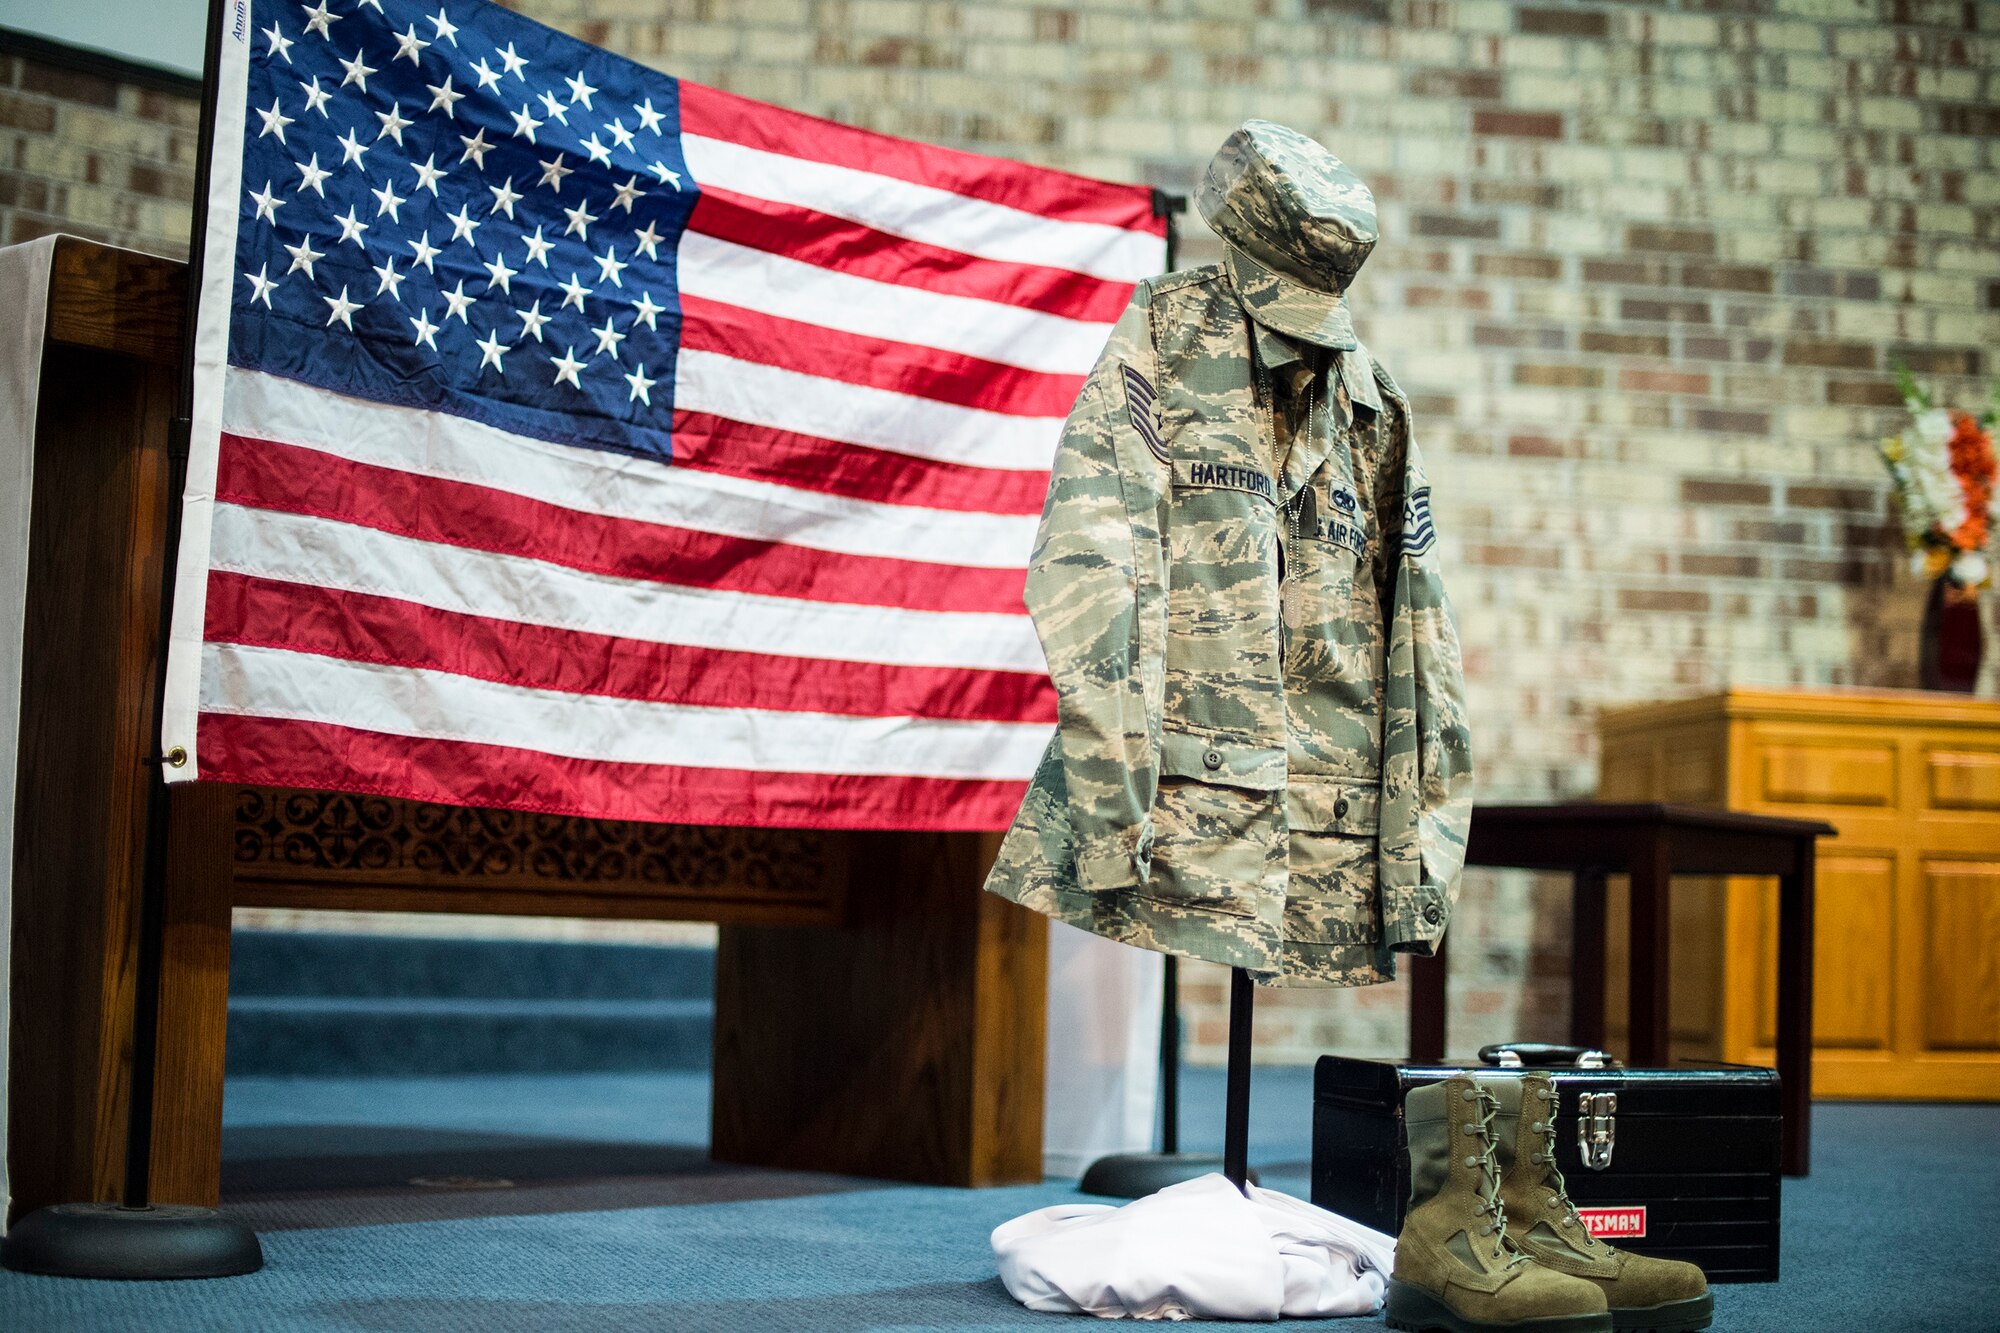 A memorial display for Tech. Sgt. Marissa Hartford rests at the altar during her memorial ceremony at the base chapel on Moody Air Force Base, Ga., Oct. 16, 2015. Hartford was assigned to Moody AFB for nine years and deployed once to Djibouti, Africa. (U.S. Air Force photo/Senior Airman Ceaira Tinsley)